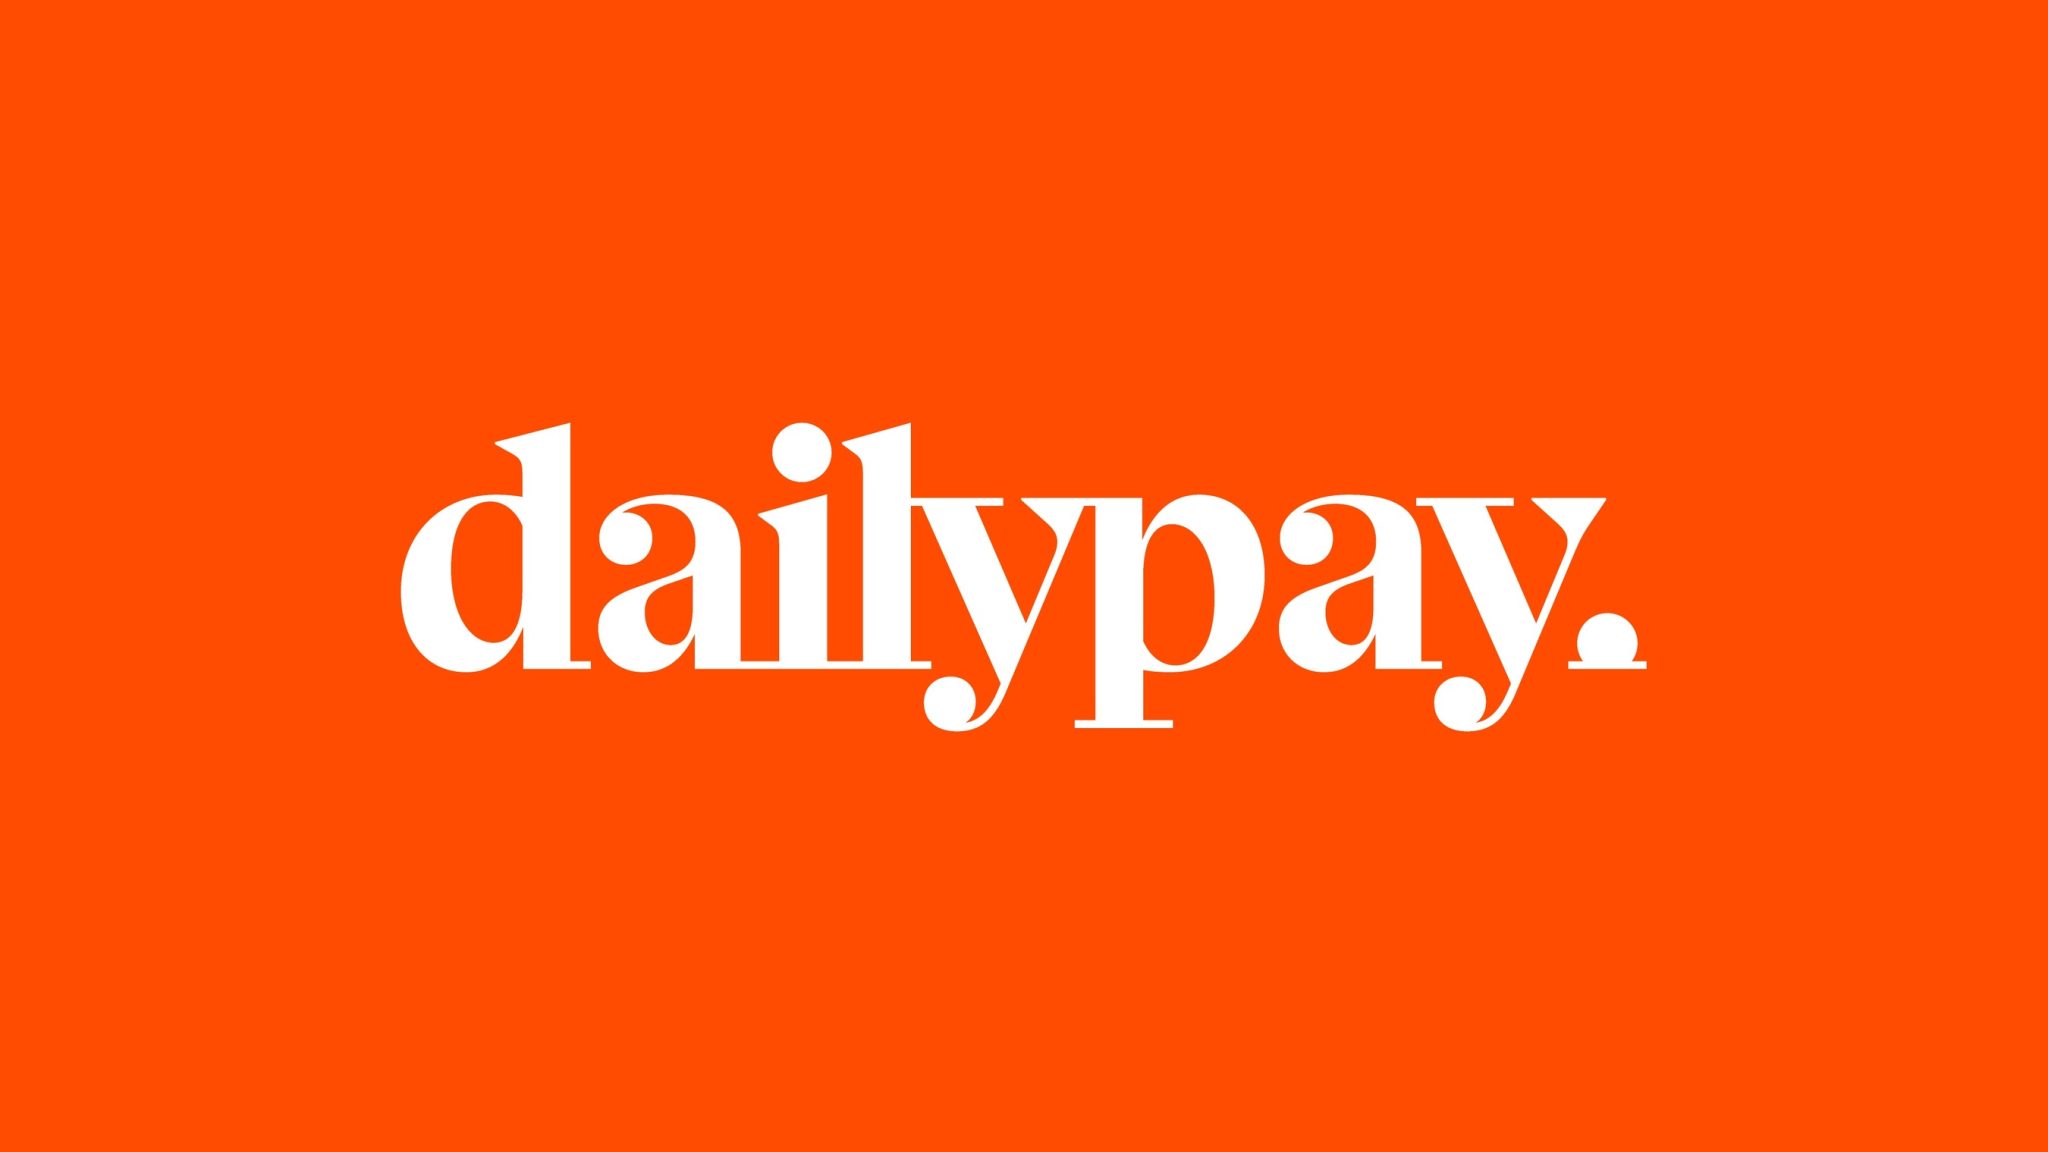 DailyPay , a NYCbased financial technology company, secured 260m in